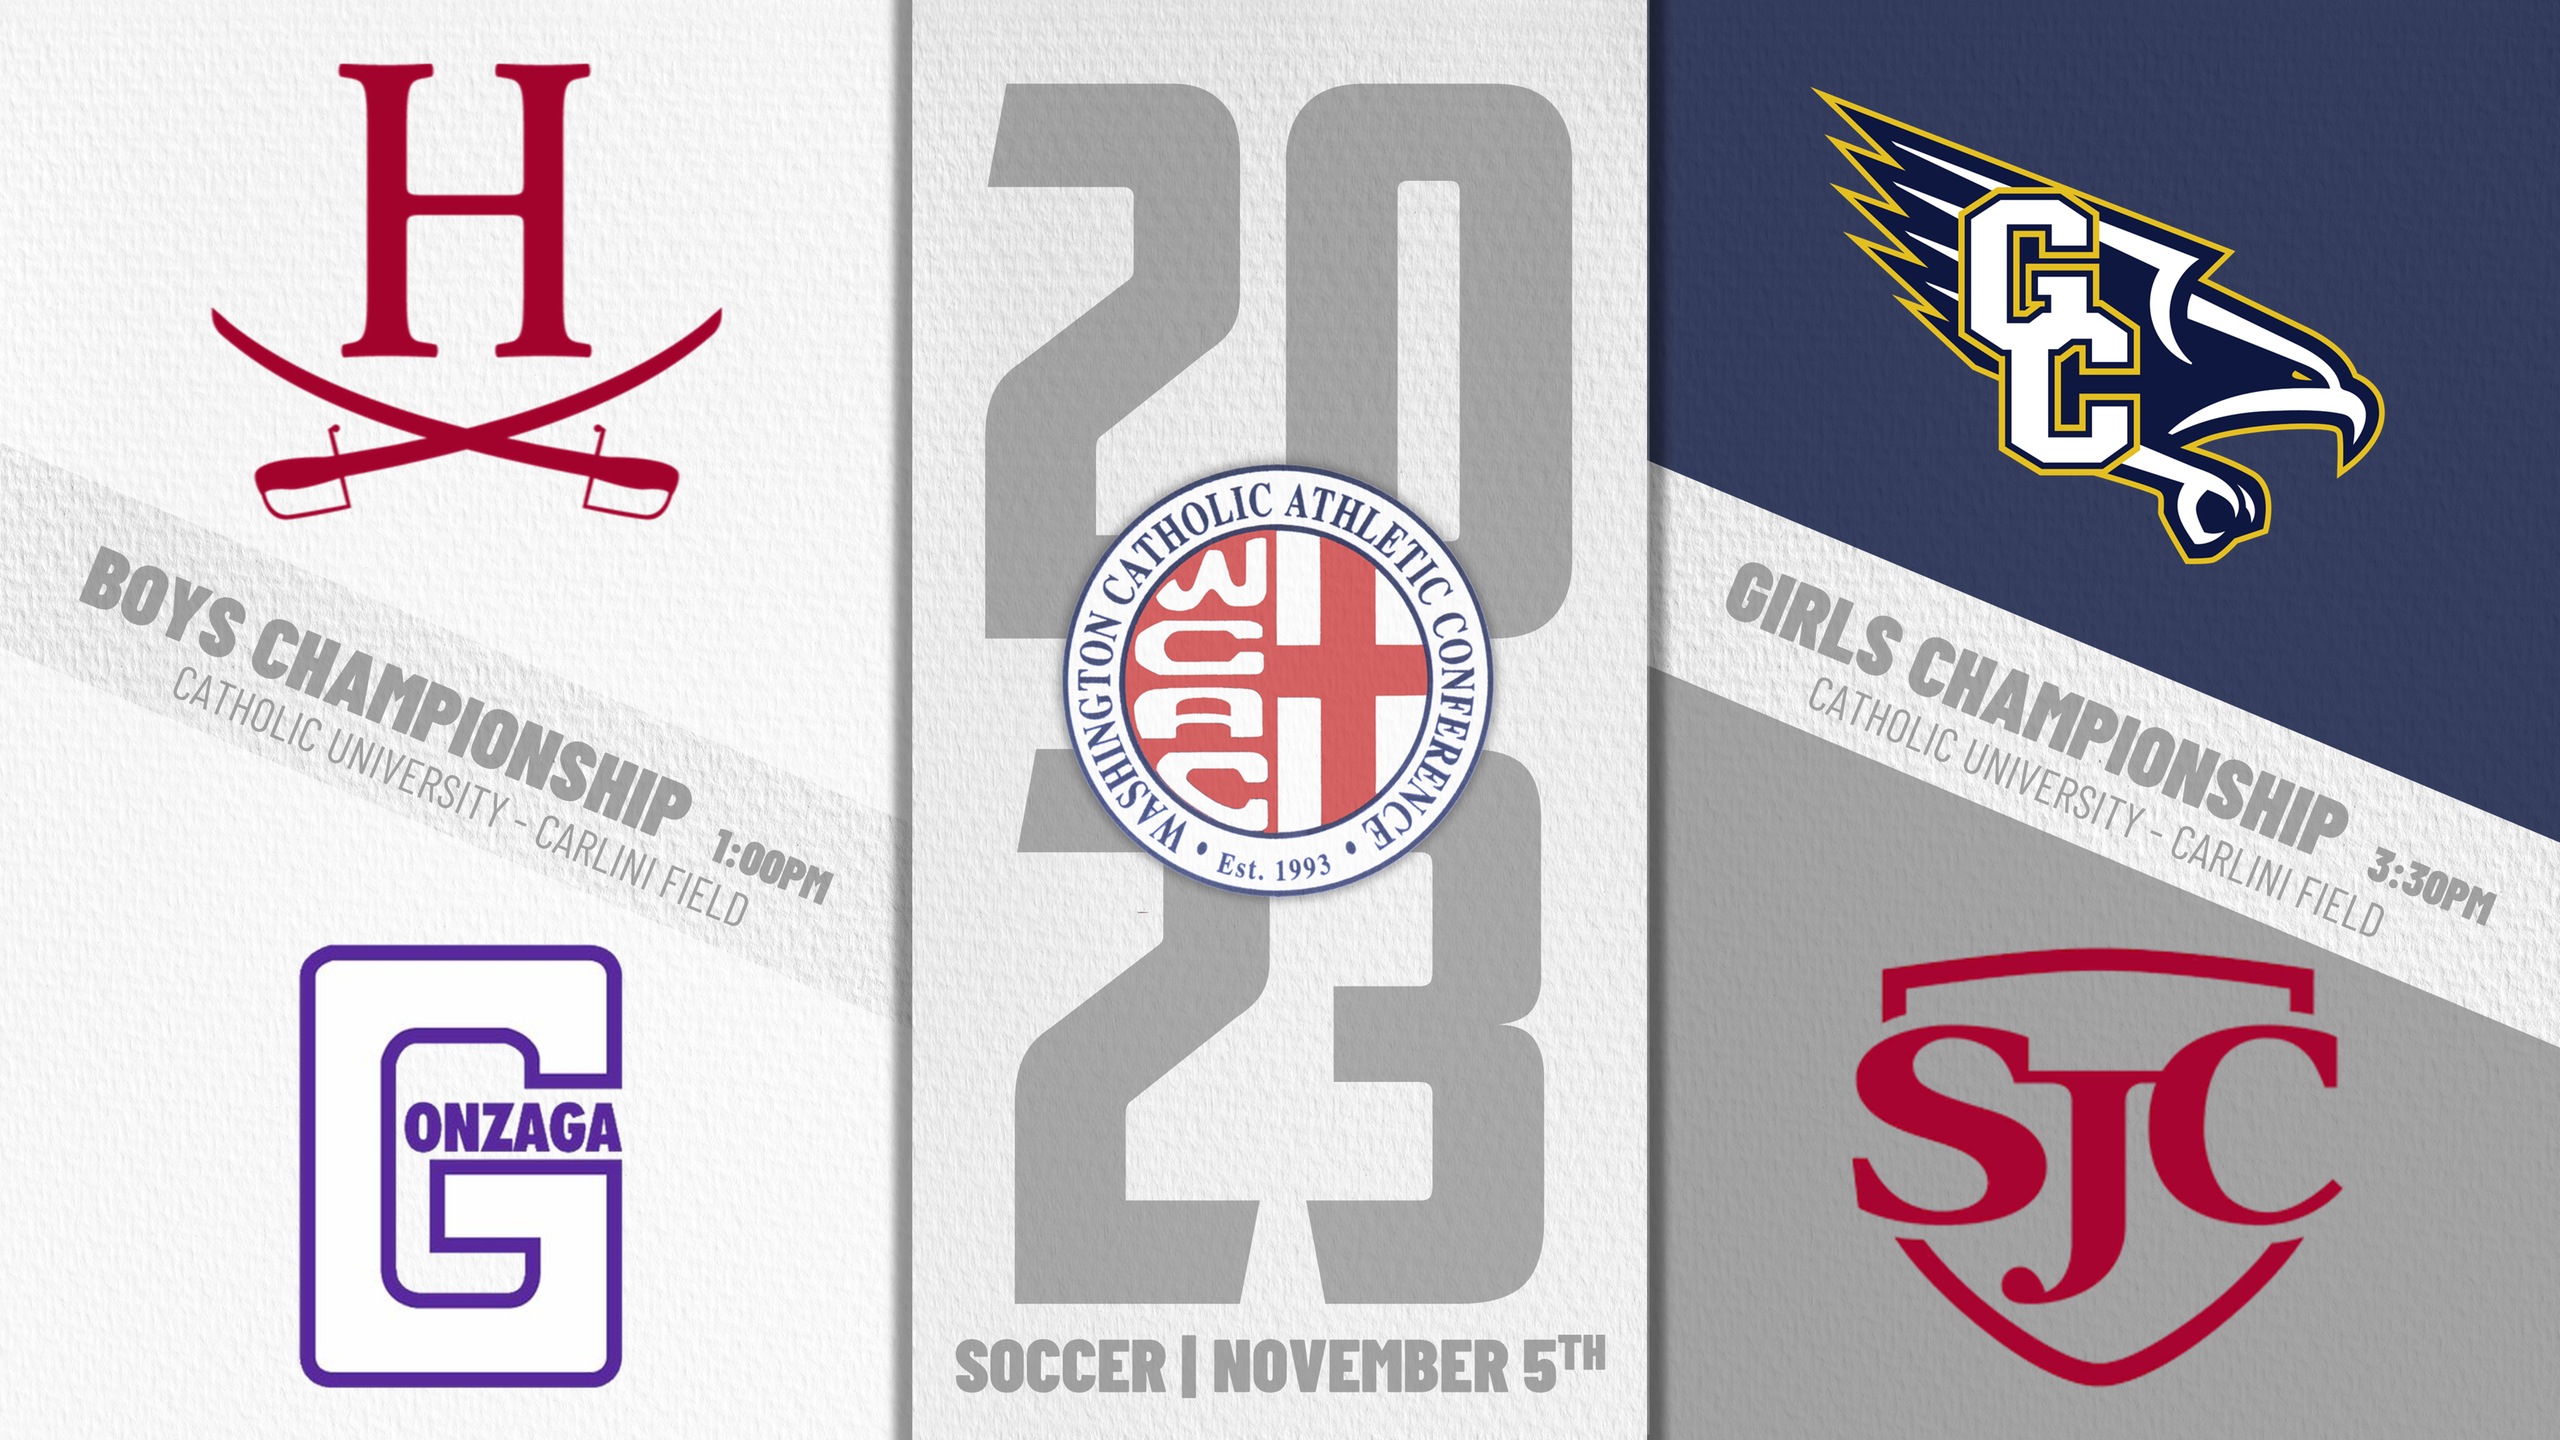 The Soccer Championships will be on November 5th - Click Here for Tickets